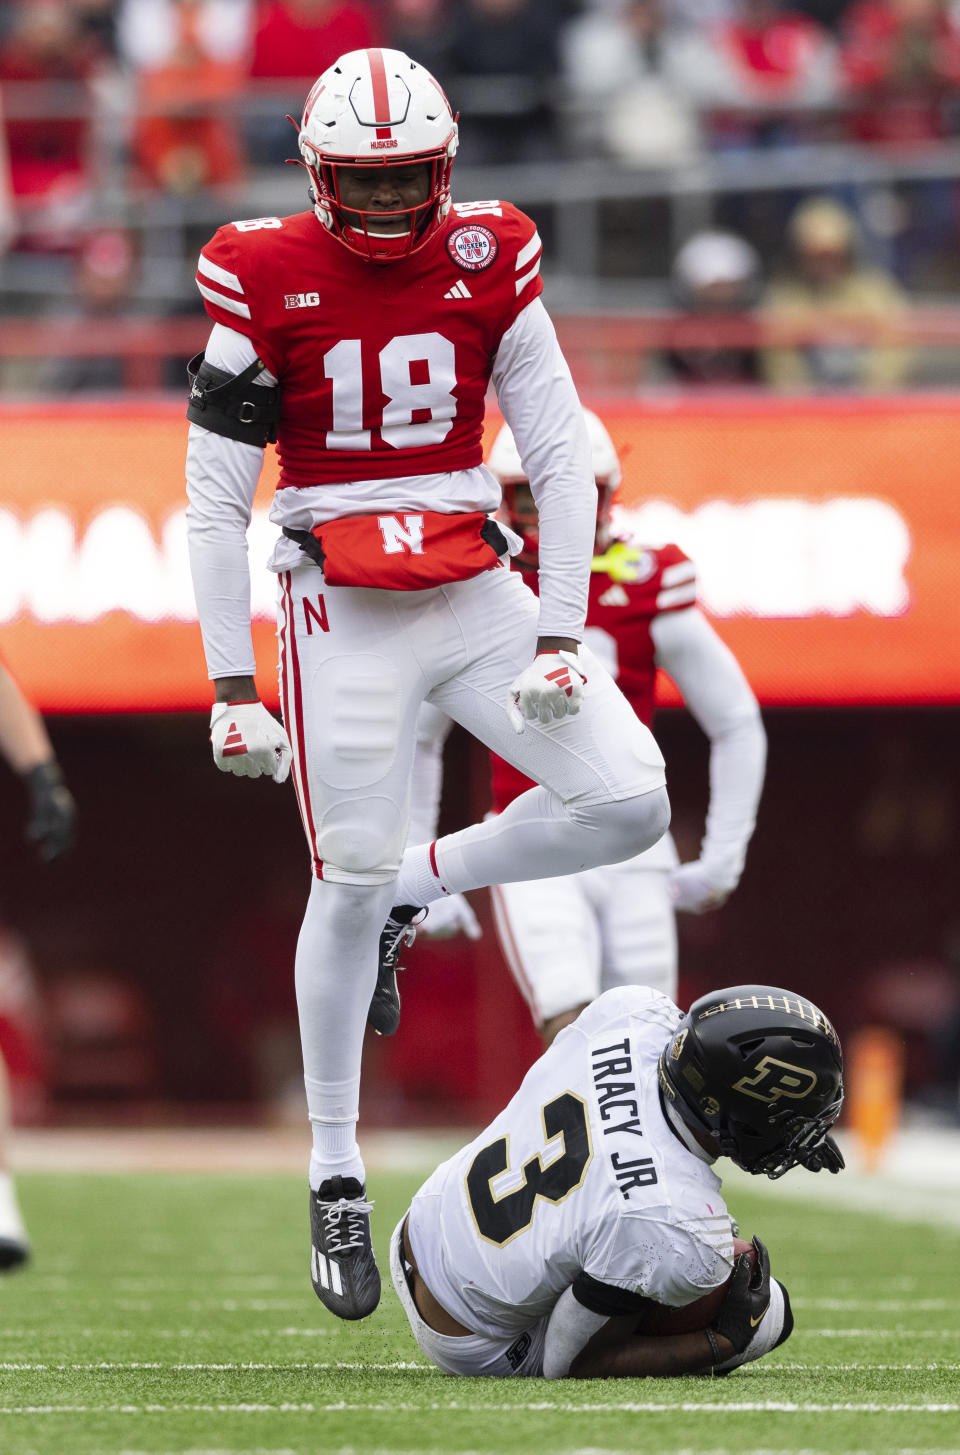 Nebraska's Princewill Umanmielen (18) celebrates after tackling Purdue's Tyrone Tracy Jr. (3) during the first half of an NCAA college football game Saturday, Oct. 28, 2023, in Lincoln, Neb. (AP Photo/Rebecca S. Gratz)